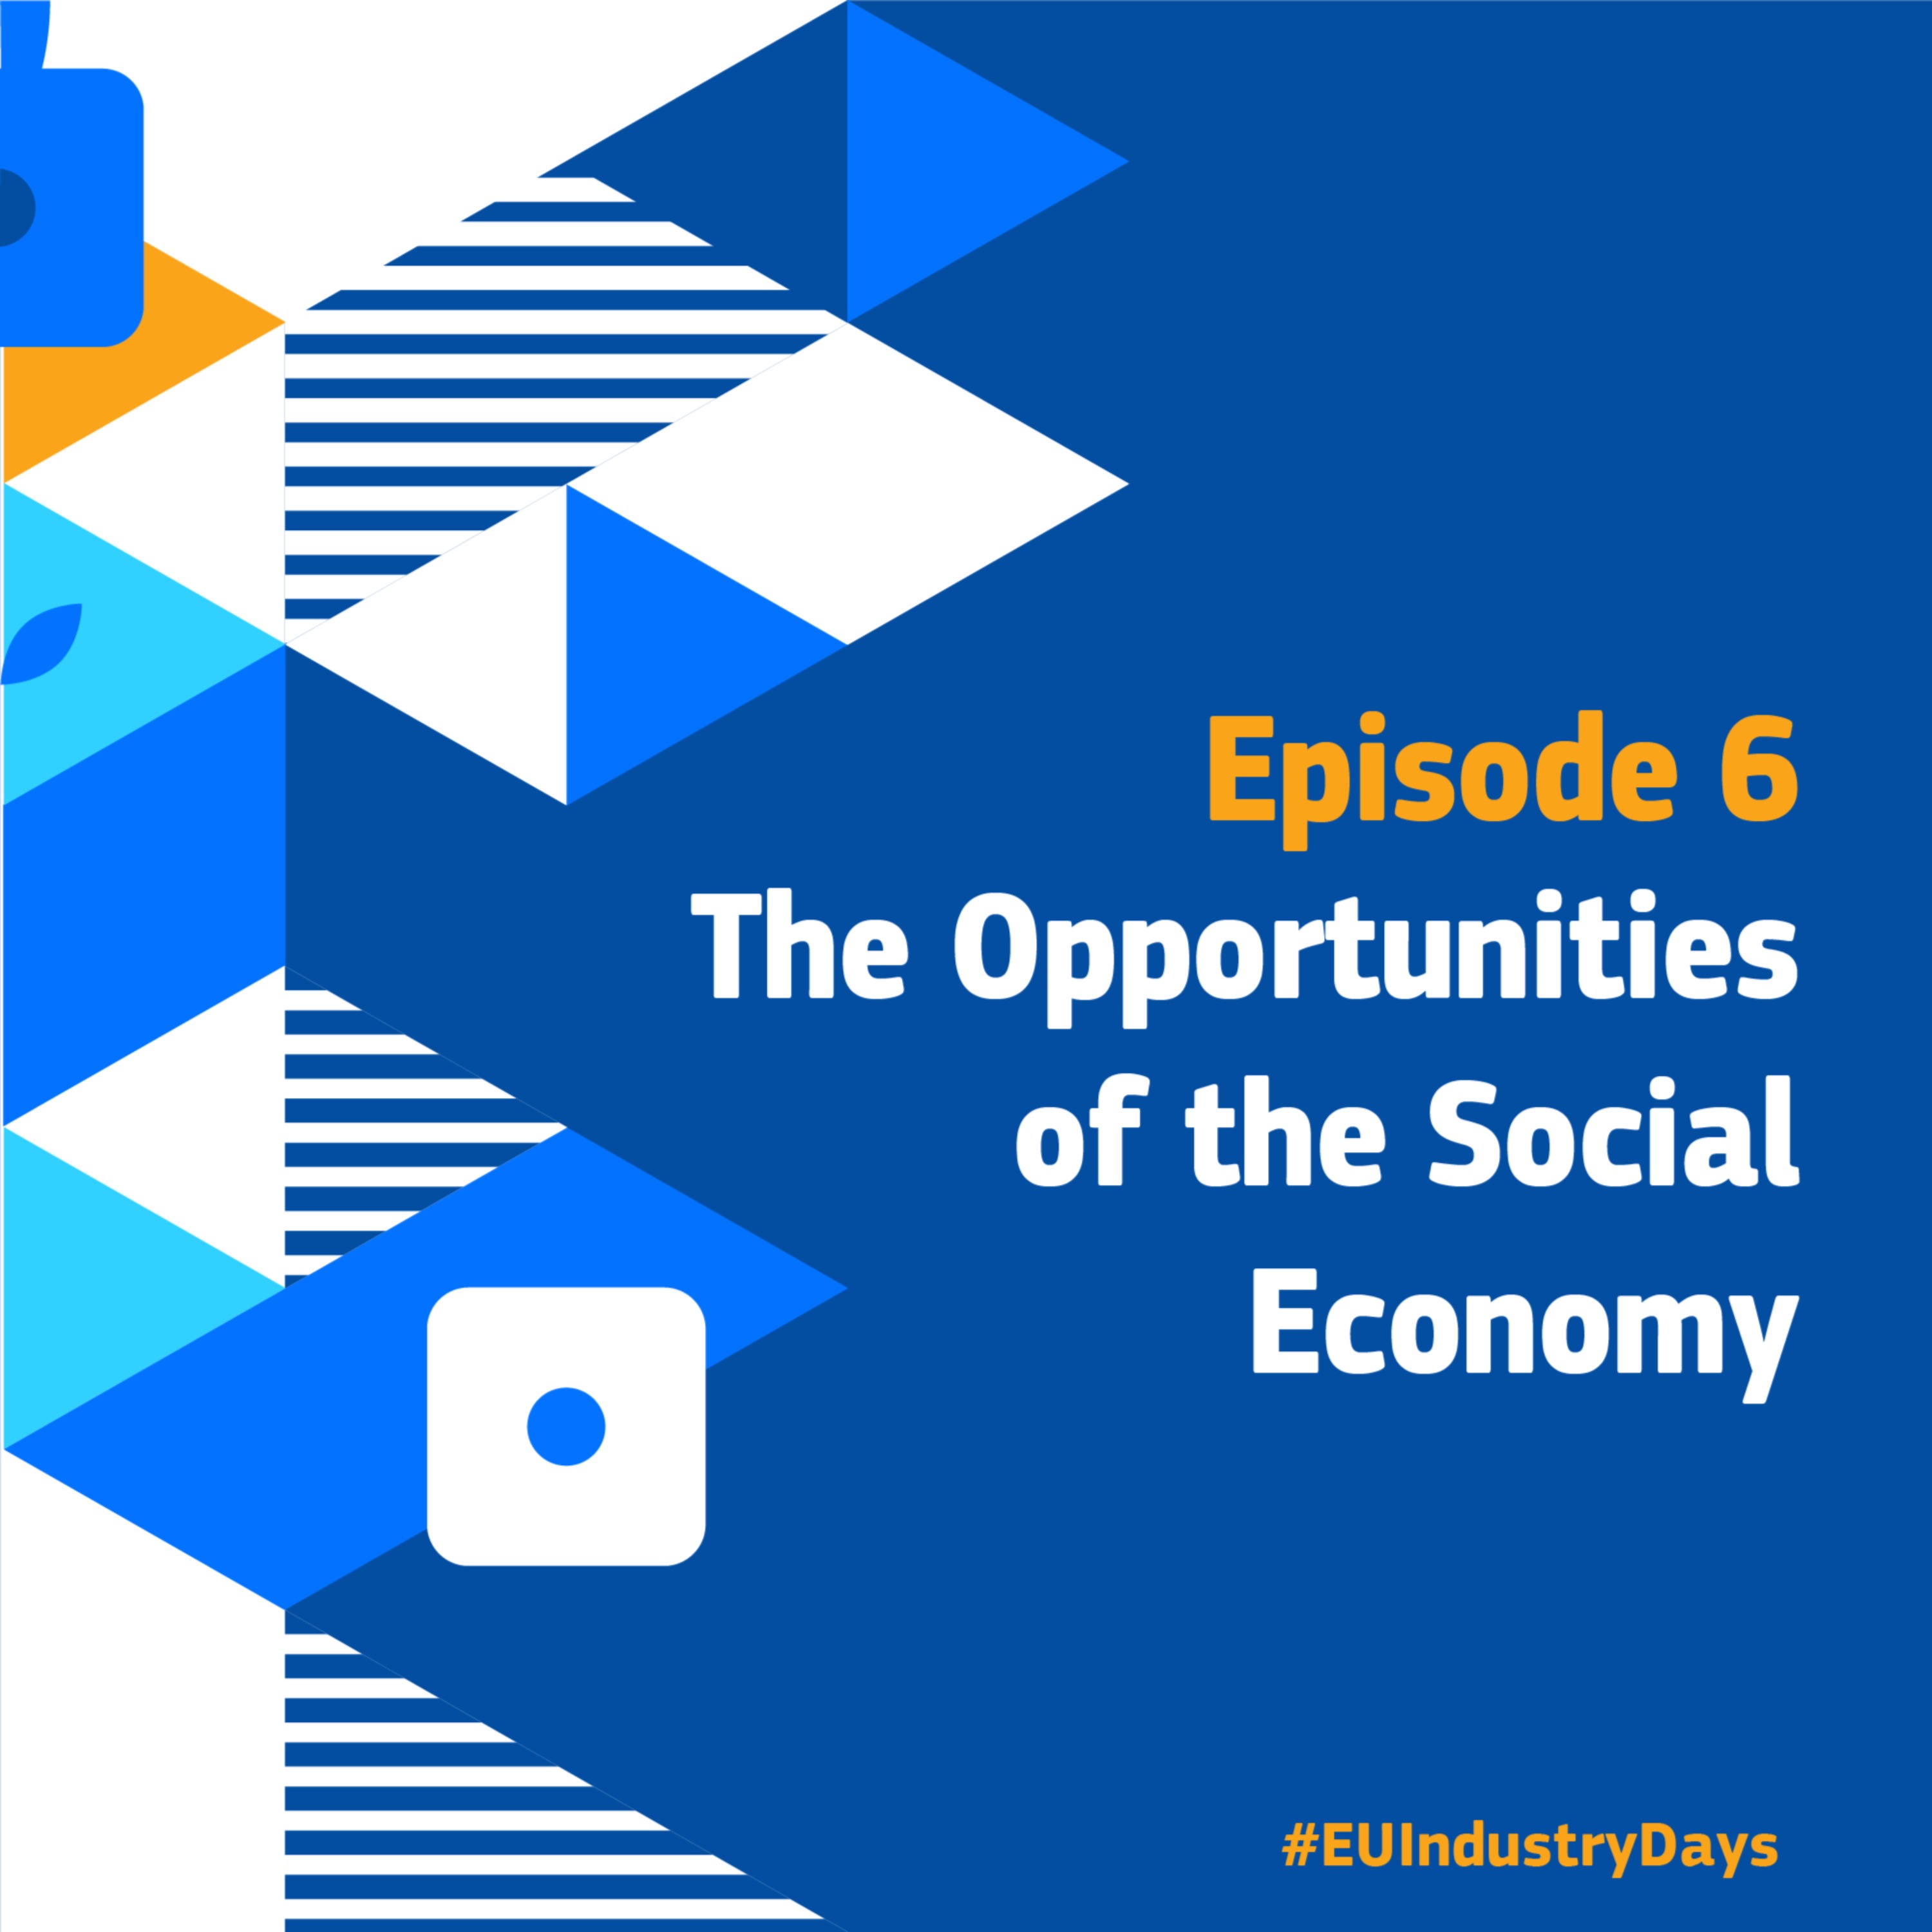 The Opportunities of the Social Economy